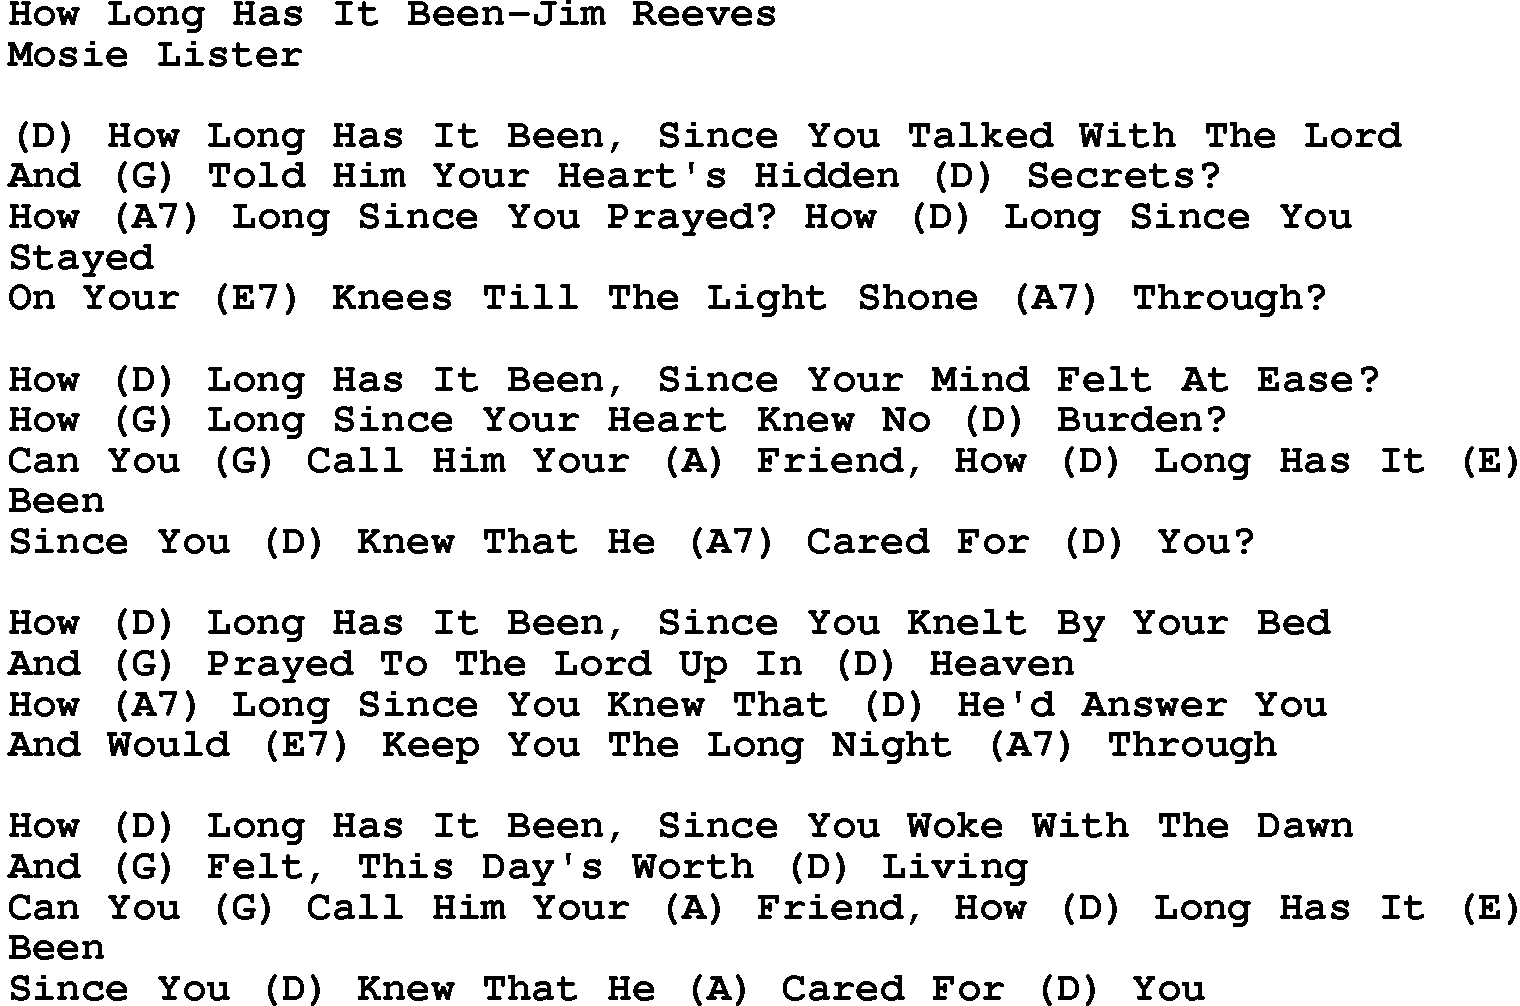 Country music song: How Long Has It Been-Jim Reeves lyrics and chords